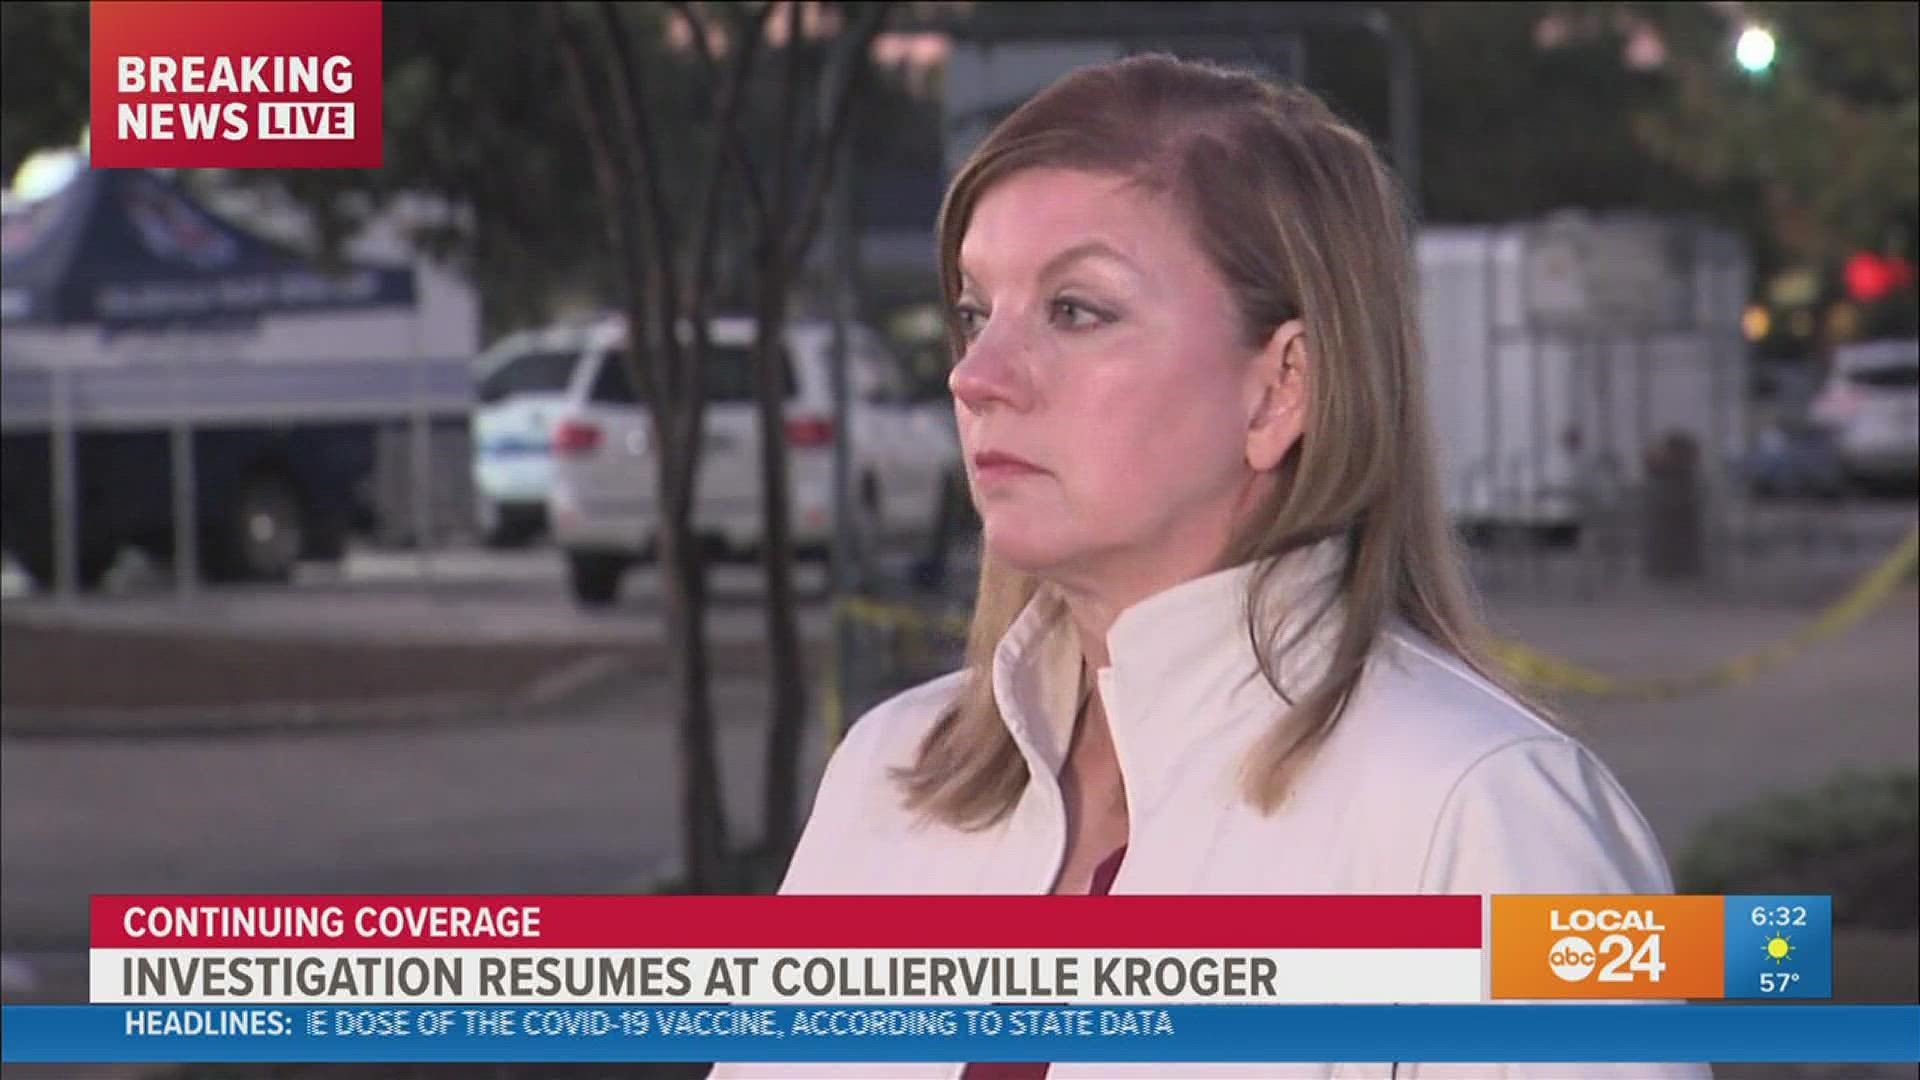 Our Jalyn Souchek spoke Friday morning with Sara Wiles, a local nurse who was inside the Kroger in Collierville when the shooting began Thursday.